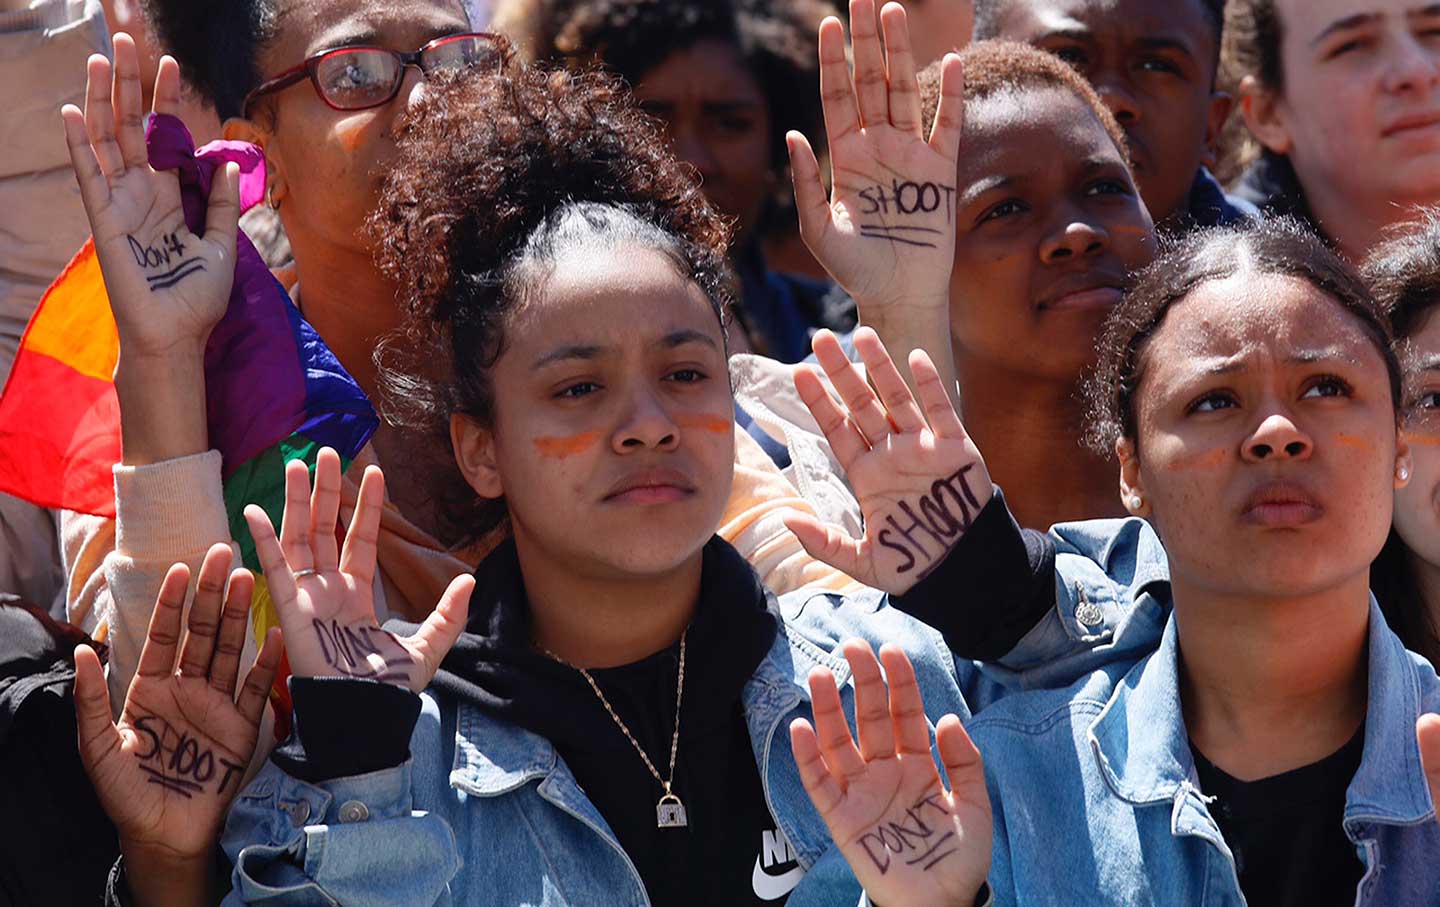 High school students call for anti-gun laws as they protest and rally in Washington Square Park, Friday April 20, 2018 in New York.